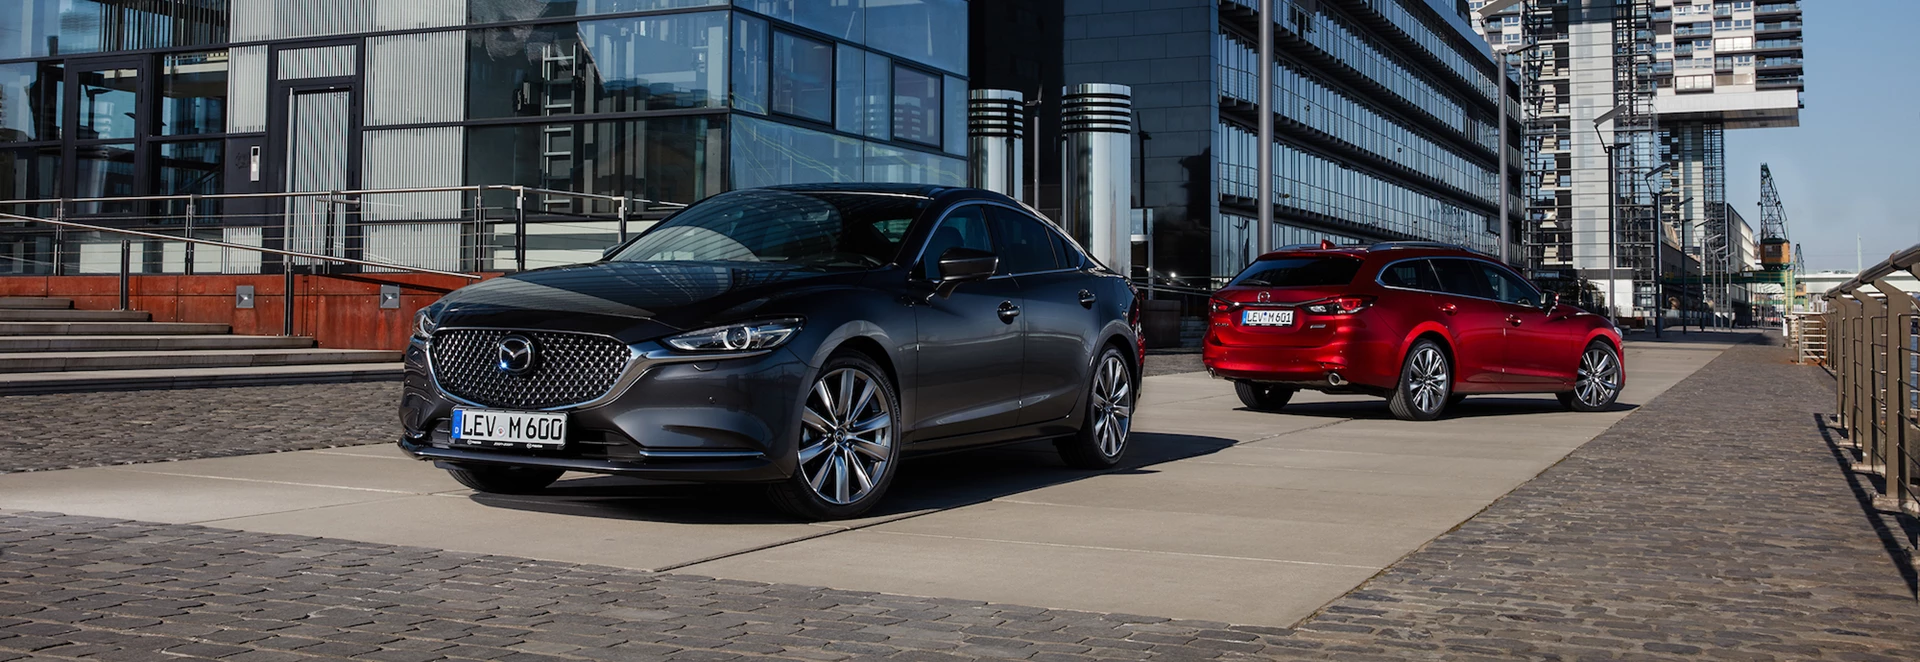 Pricing confirmed for 2018 Mazda 6